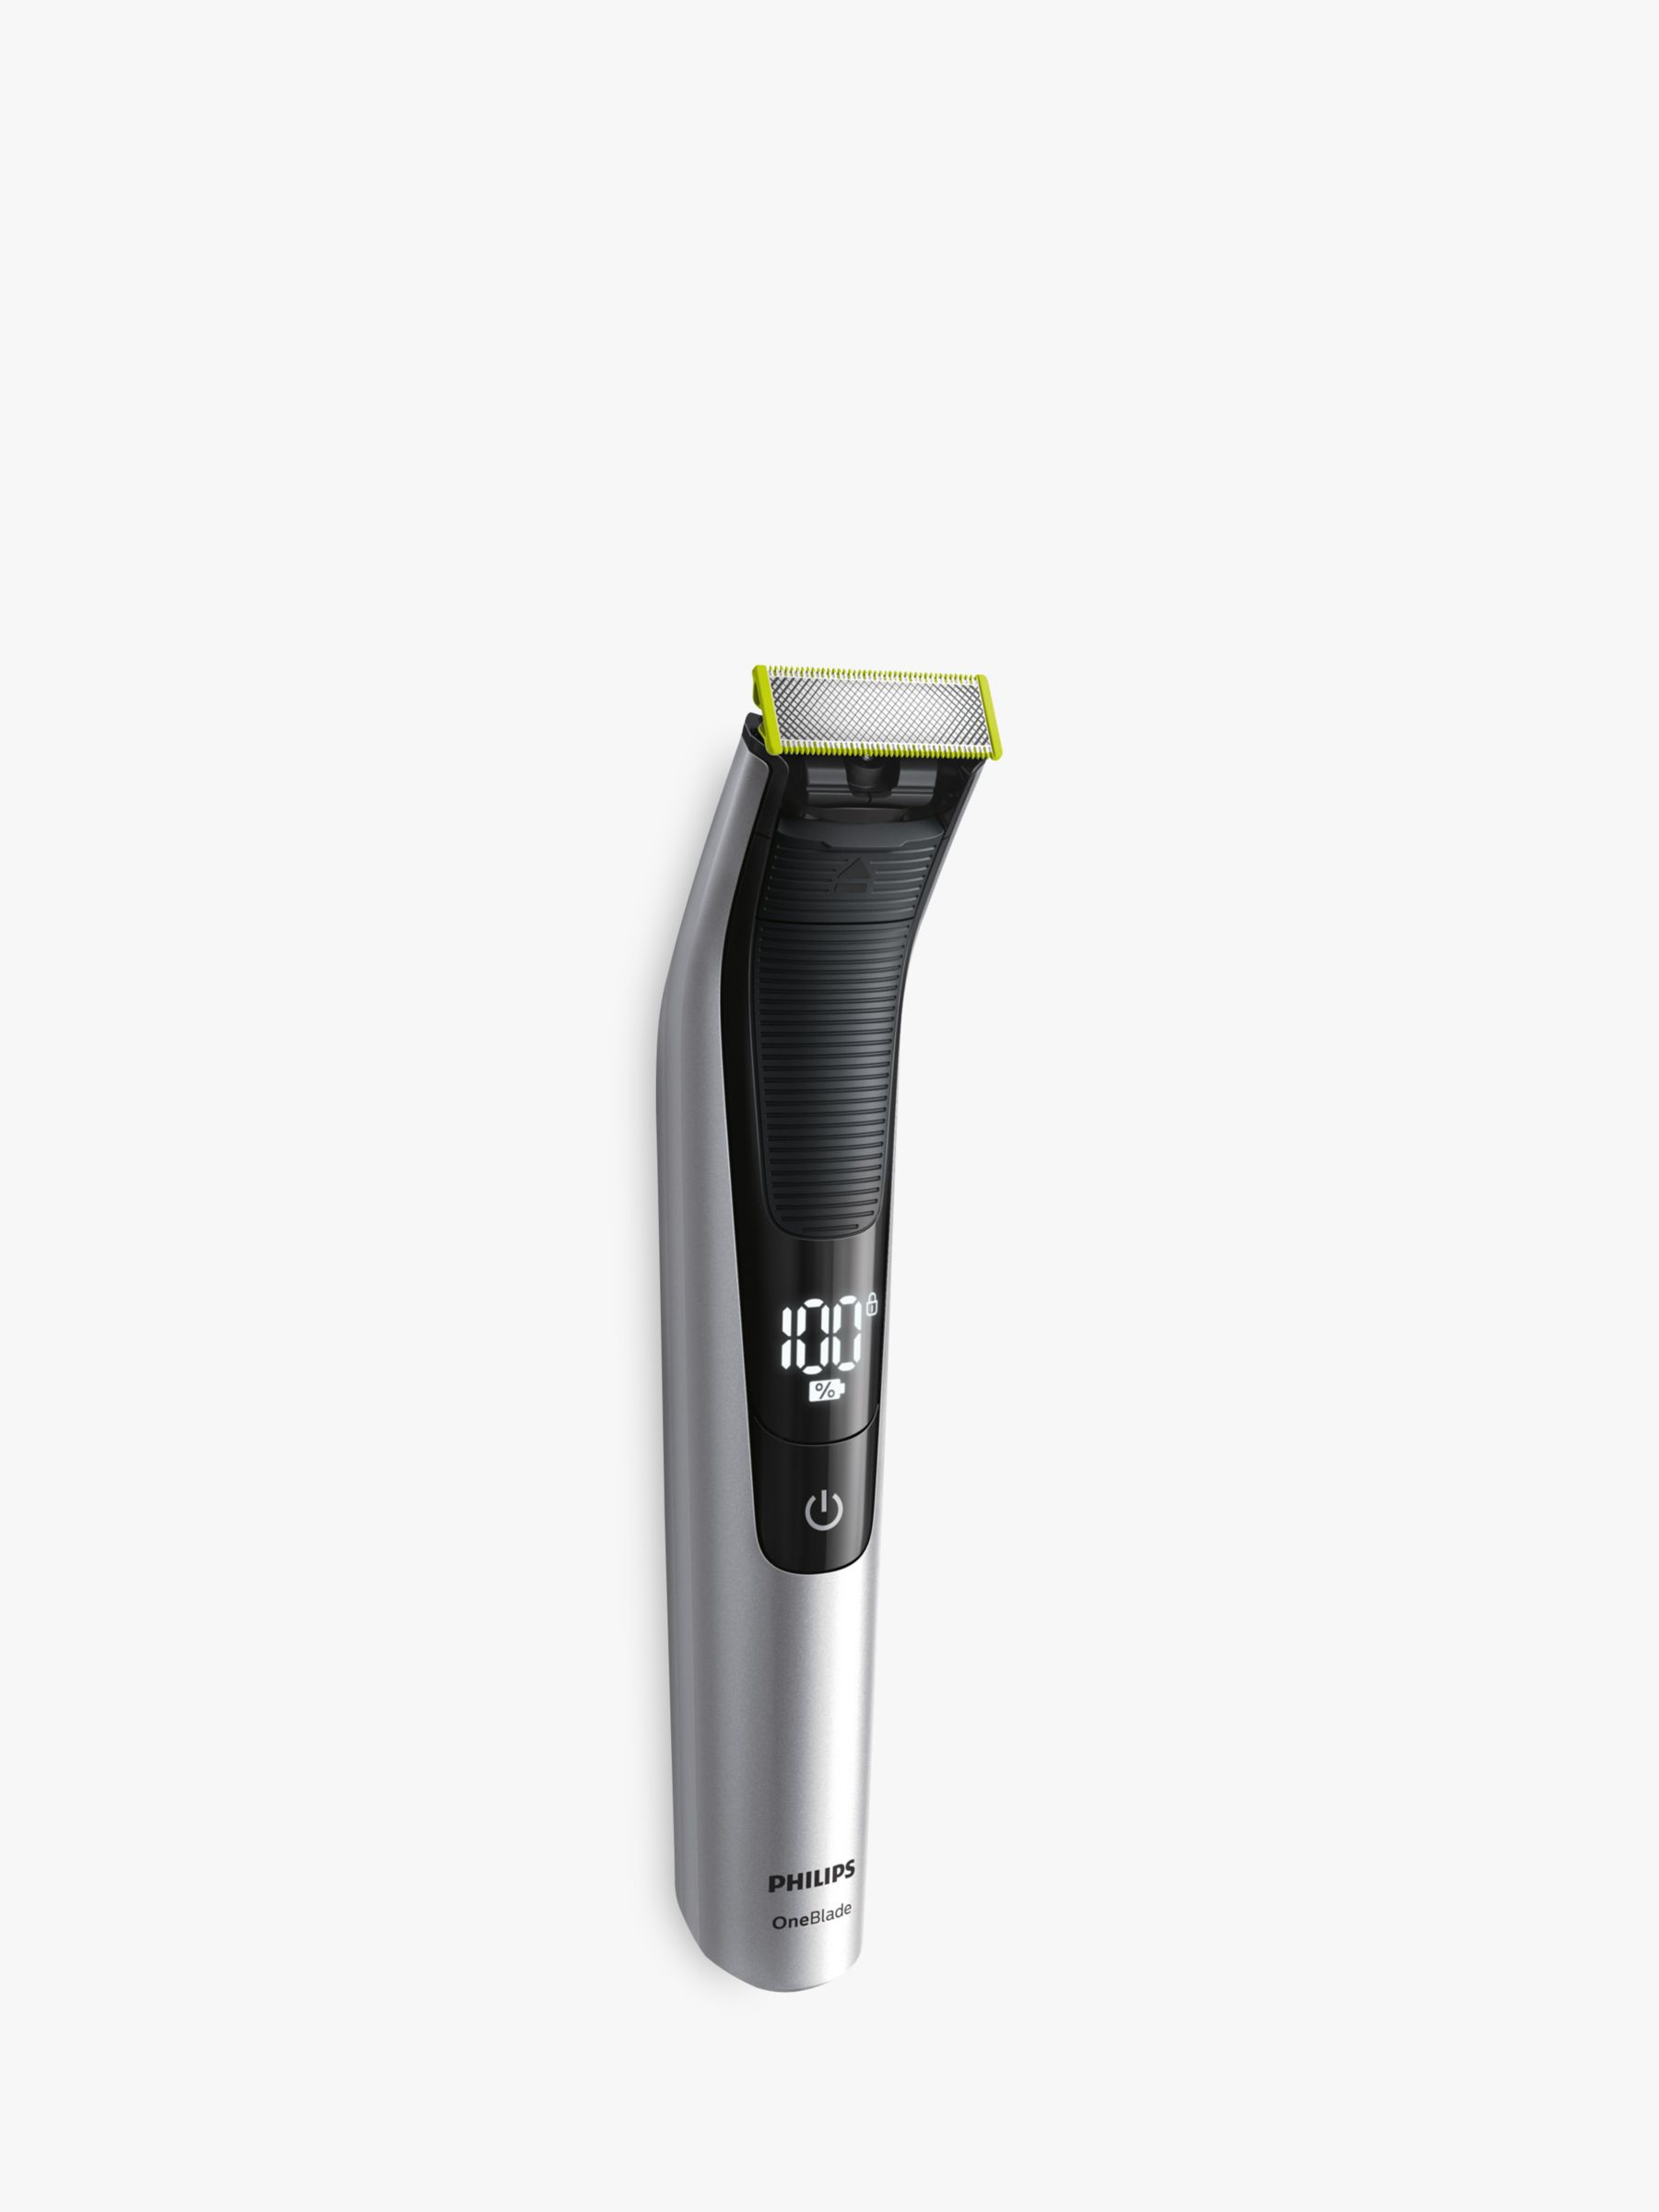 philips one blade pro trimmer